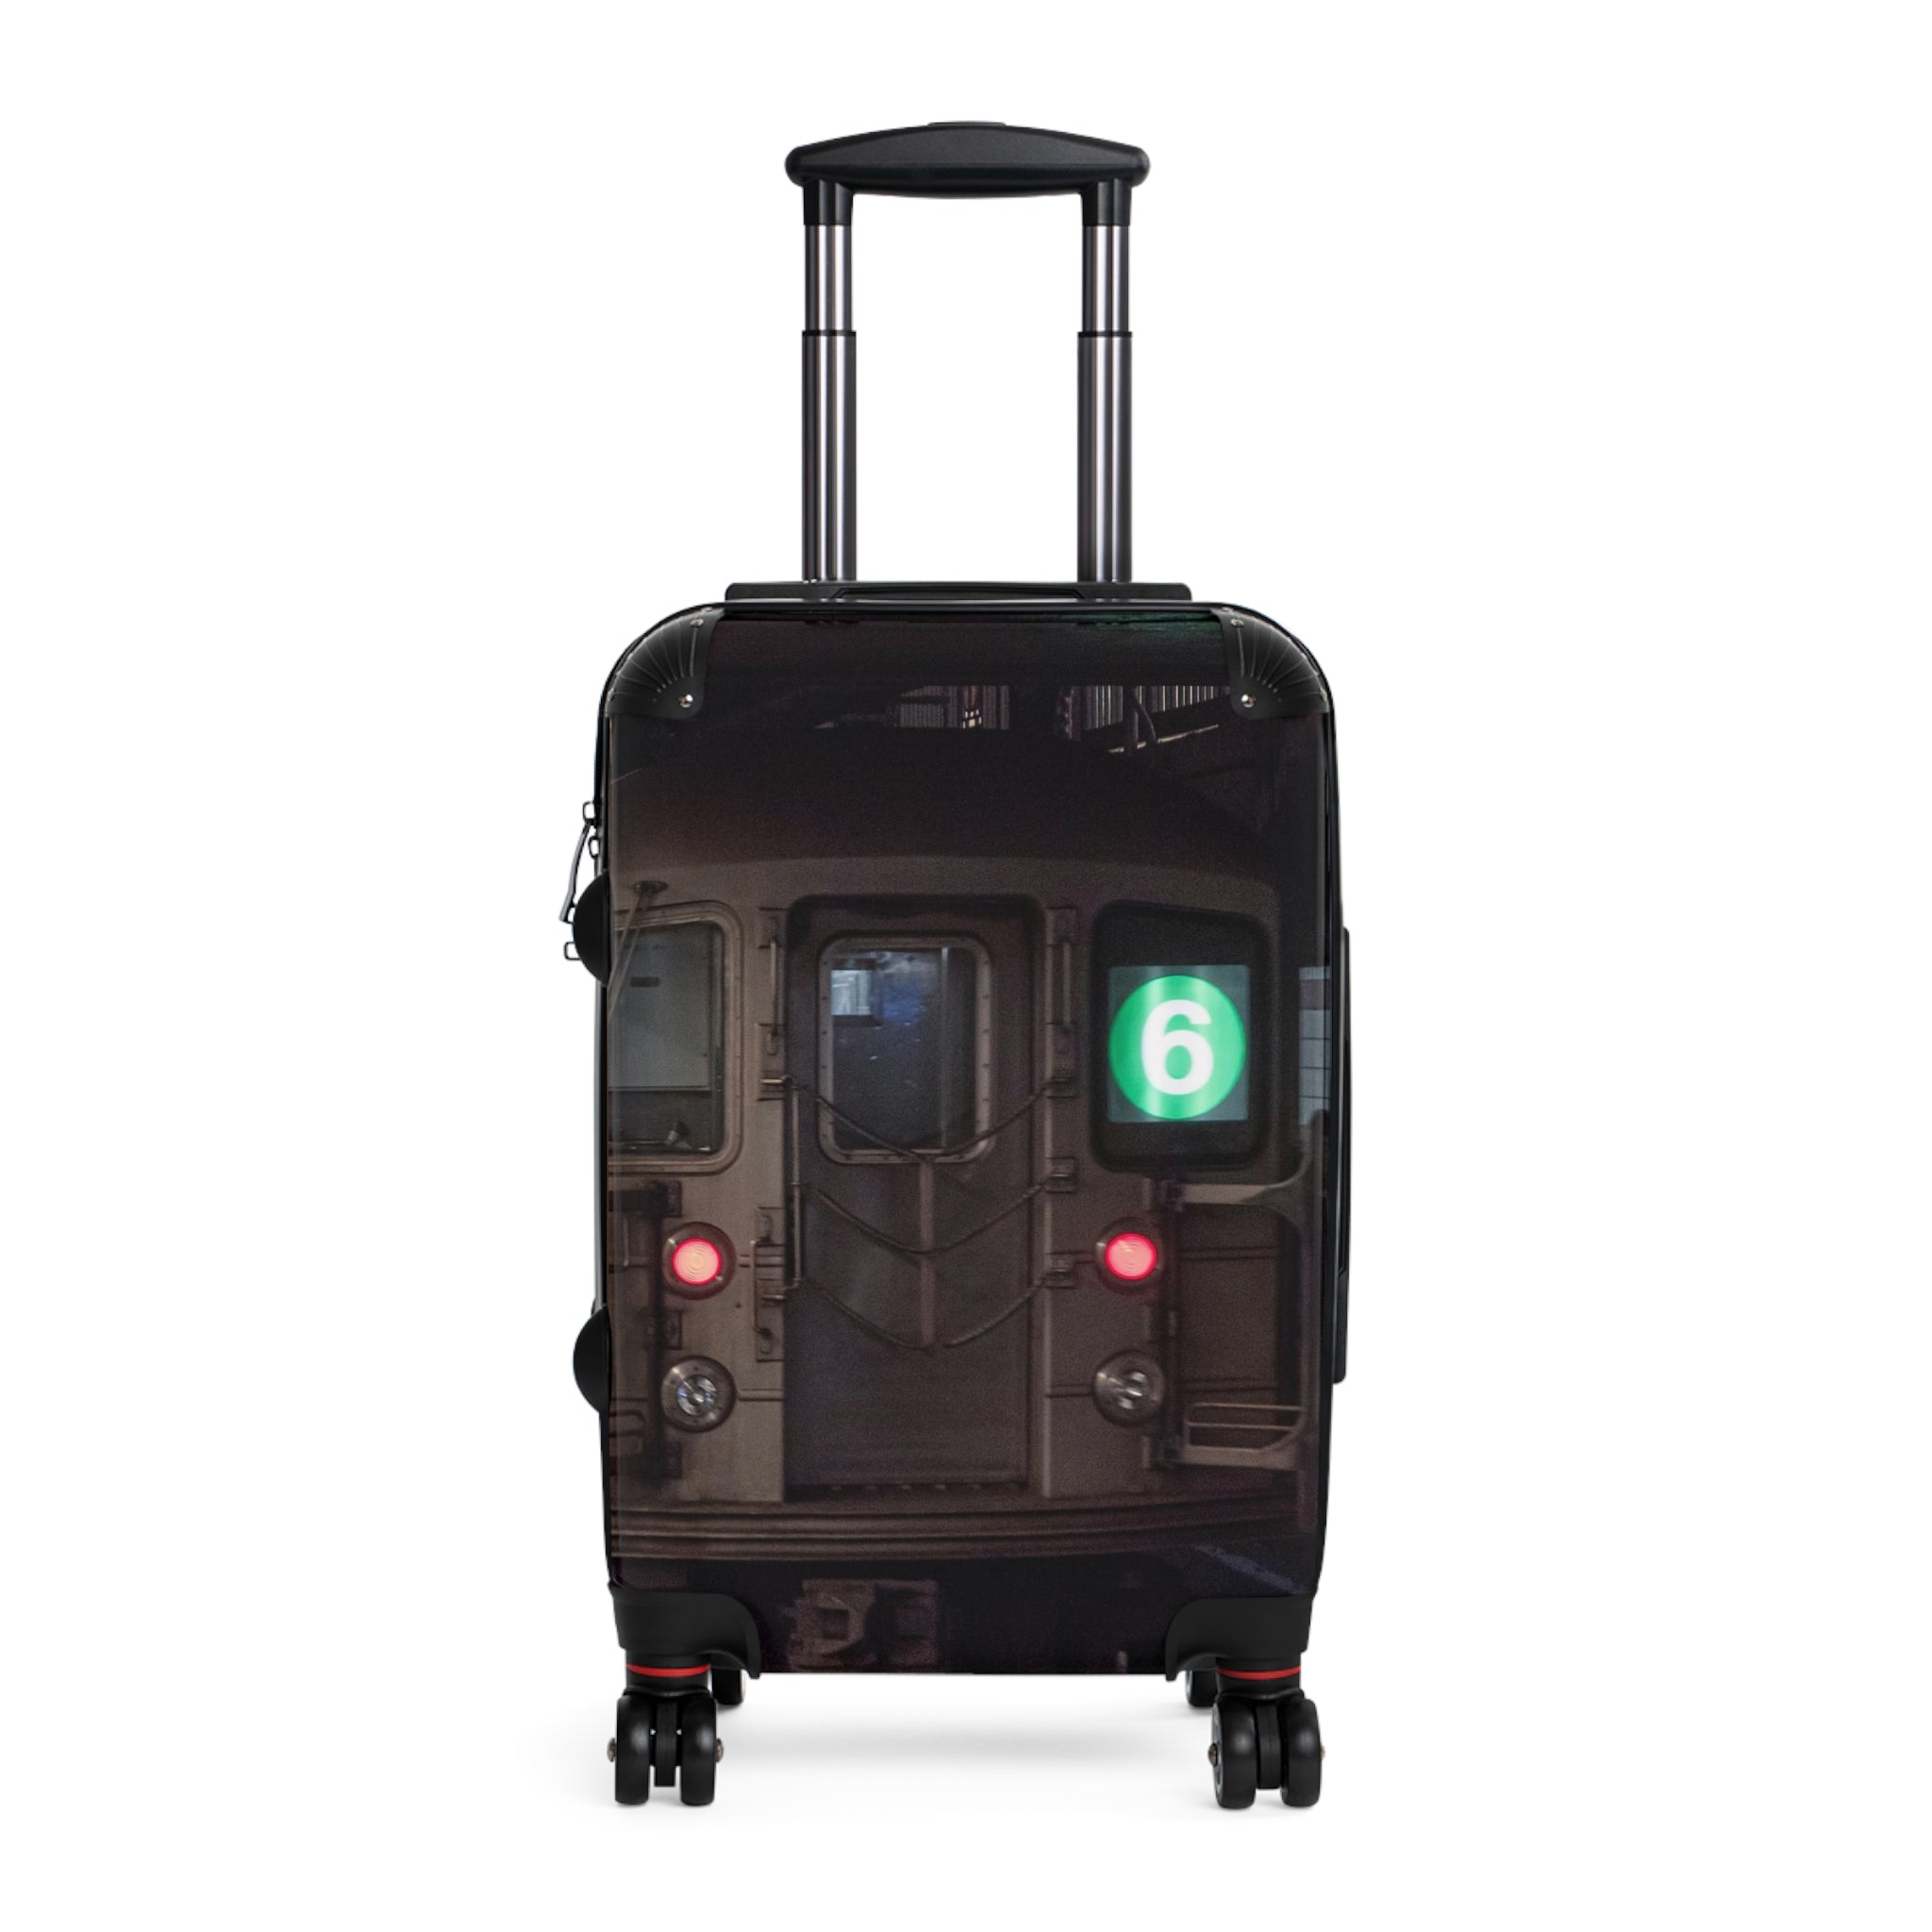 The Bronx 6 line Carry-On